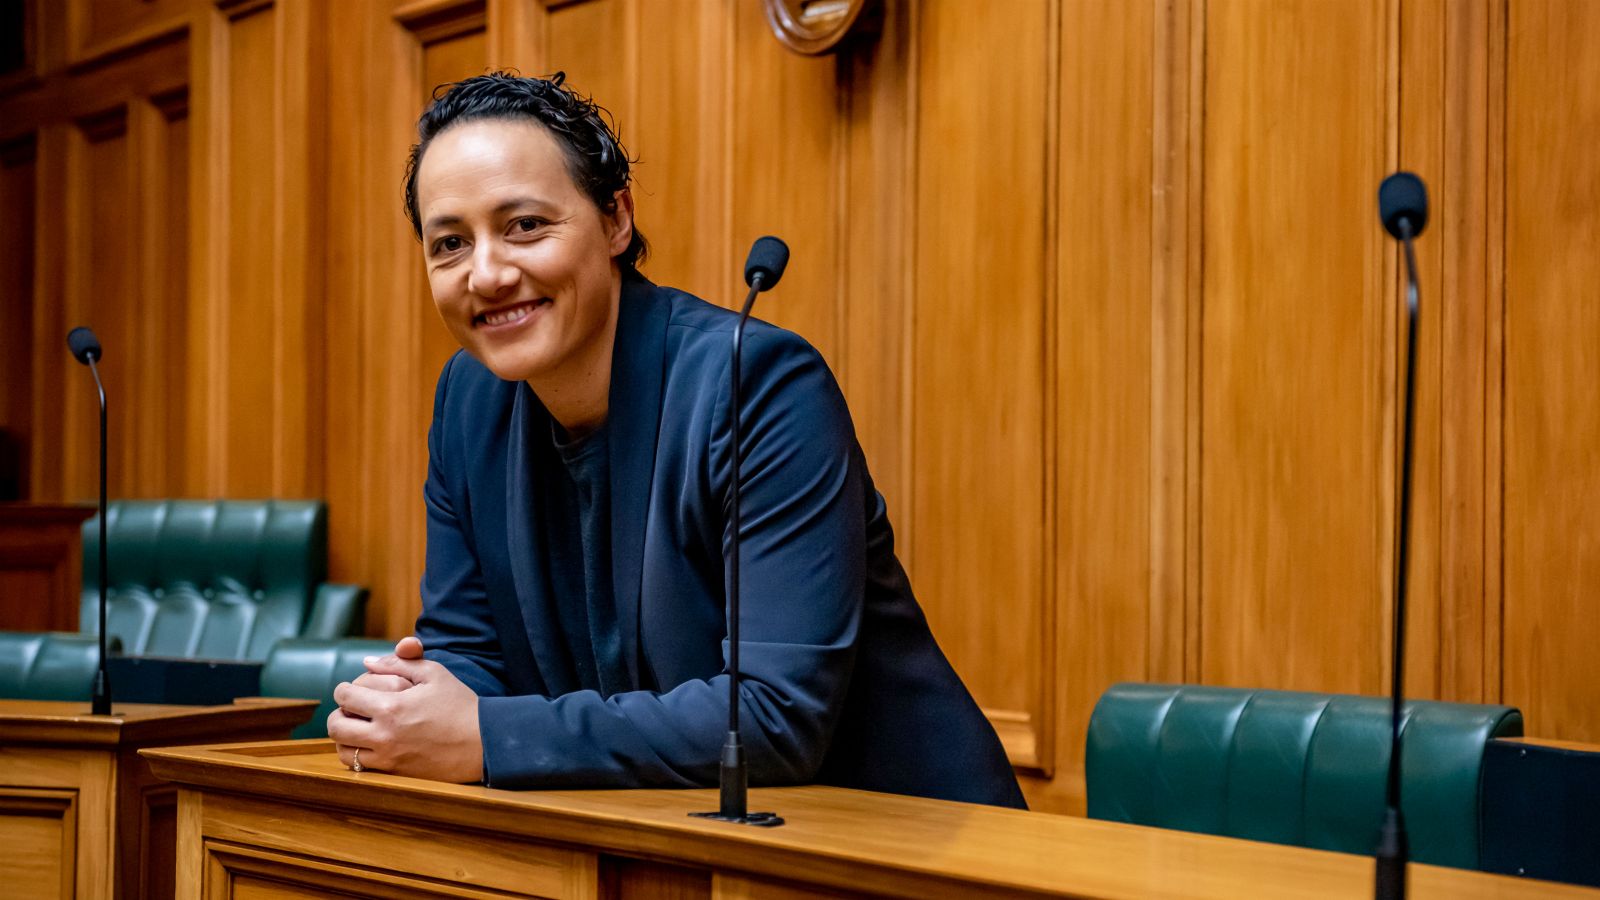 MP Kiritapu Allan leans forward from a green leather chair onto a rimu timber bench in the grandly furnished heart of New Zealand Parliament, the Chamber.